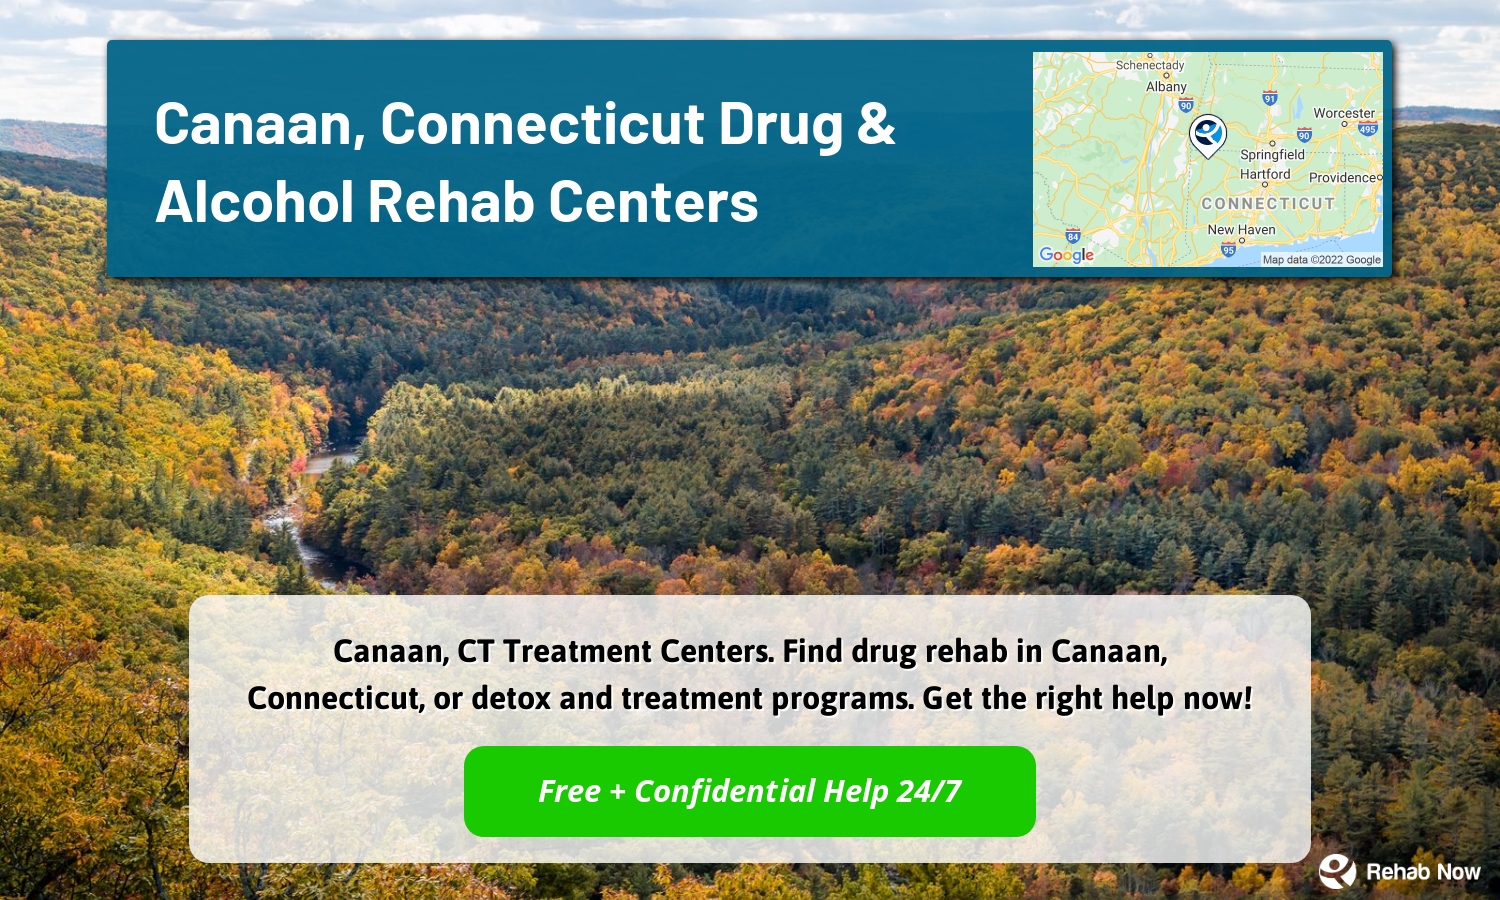 Canaan, CT Treatment Centers. Find drug rehab in Canaan, Connecticut, or detox and treatment programs. Get the right help now!